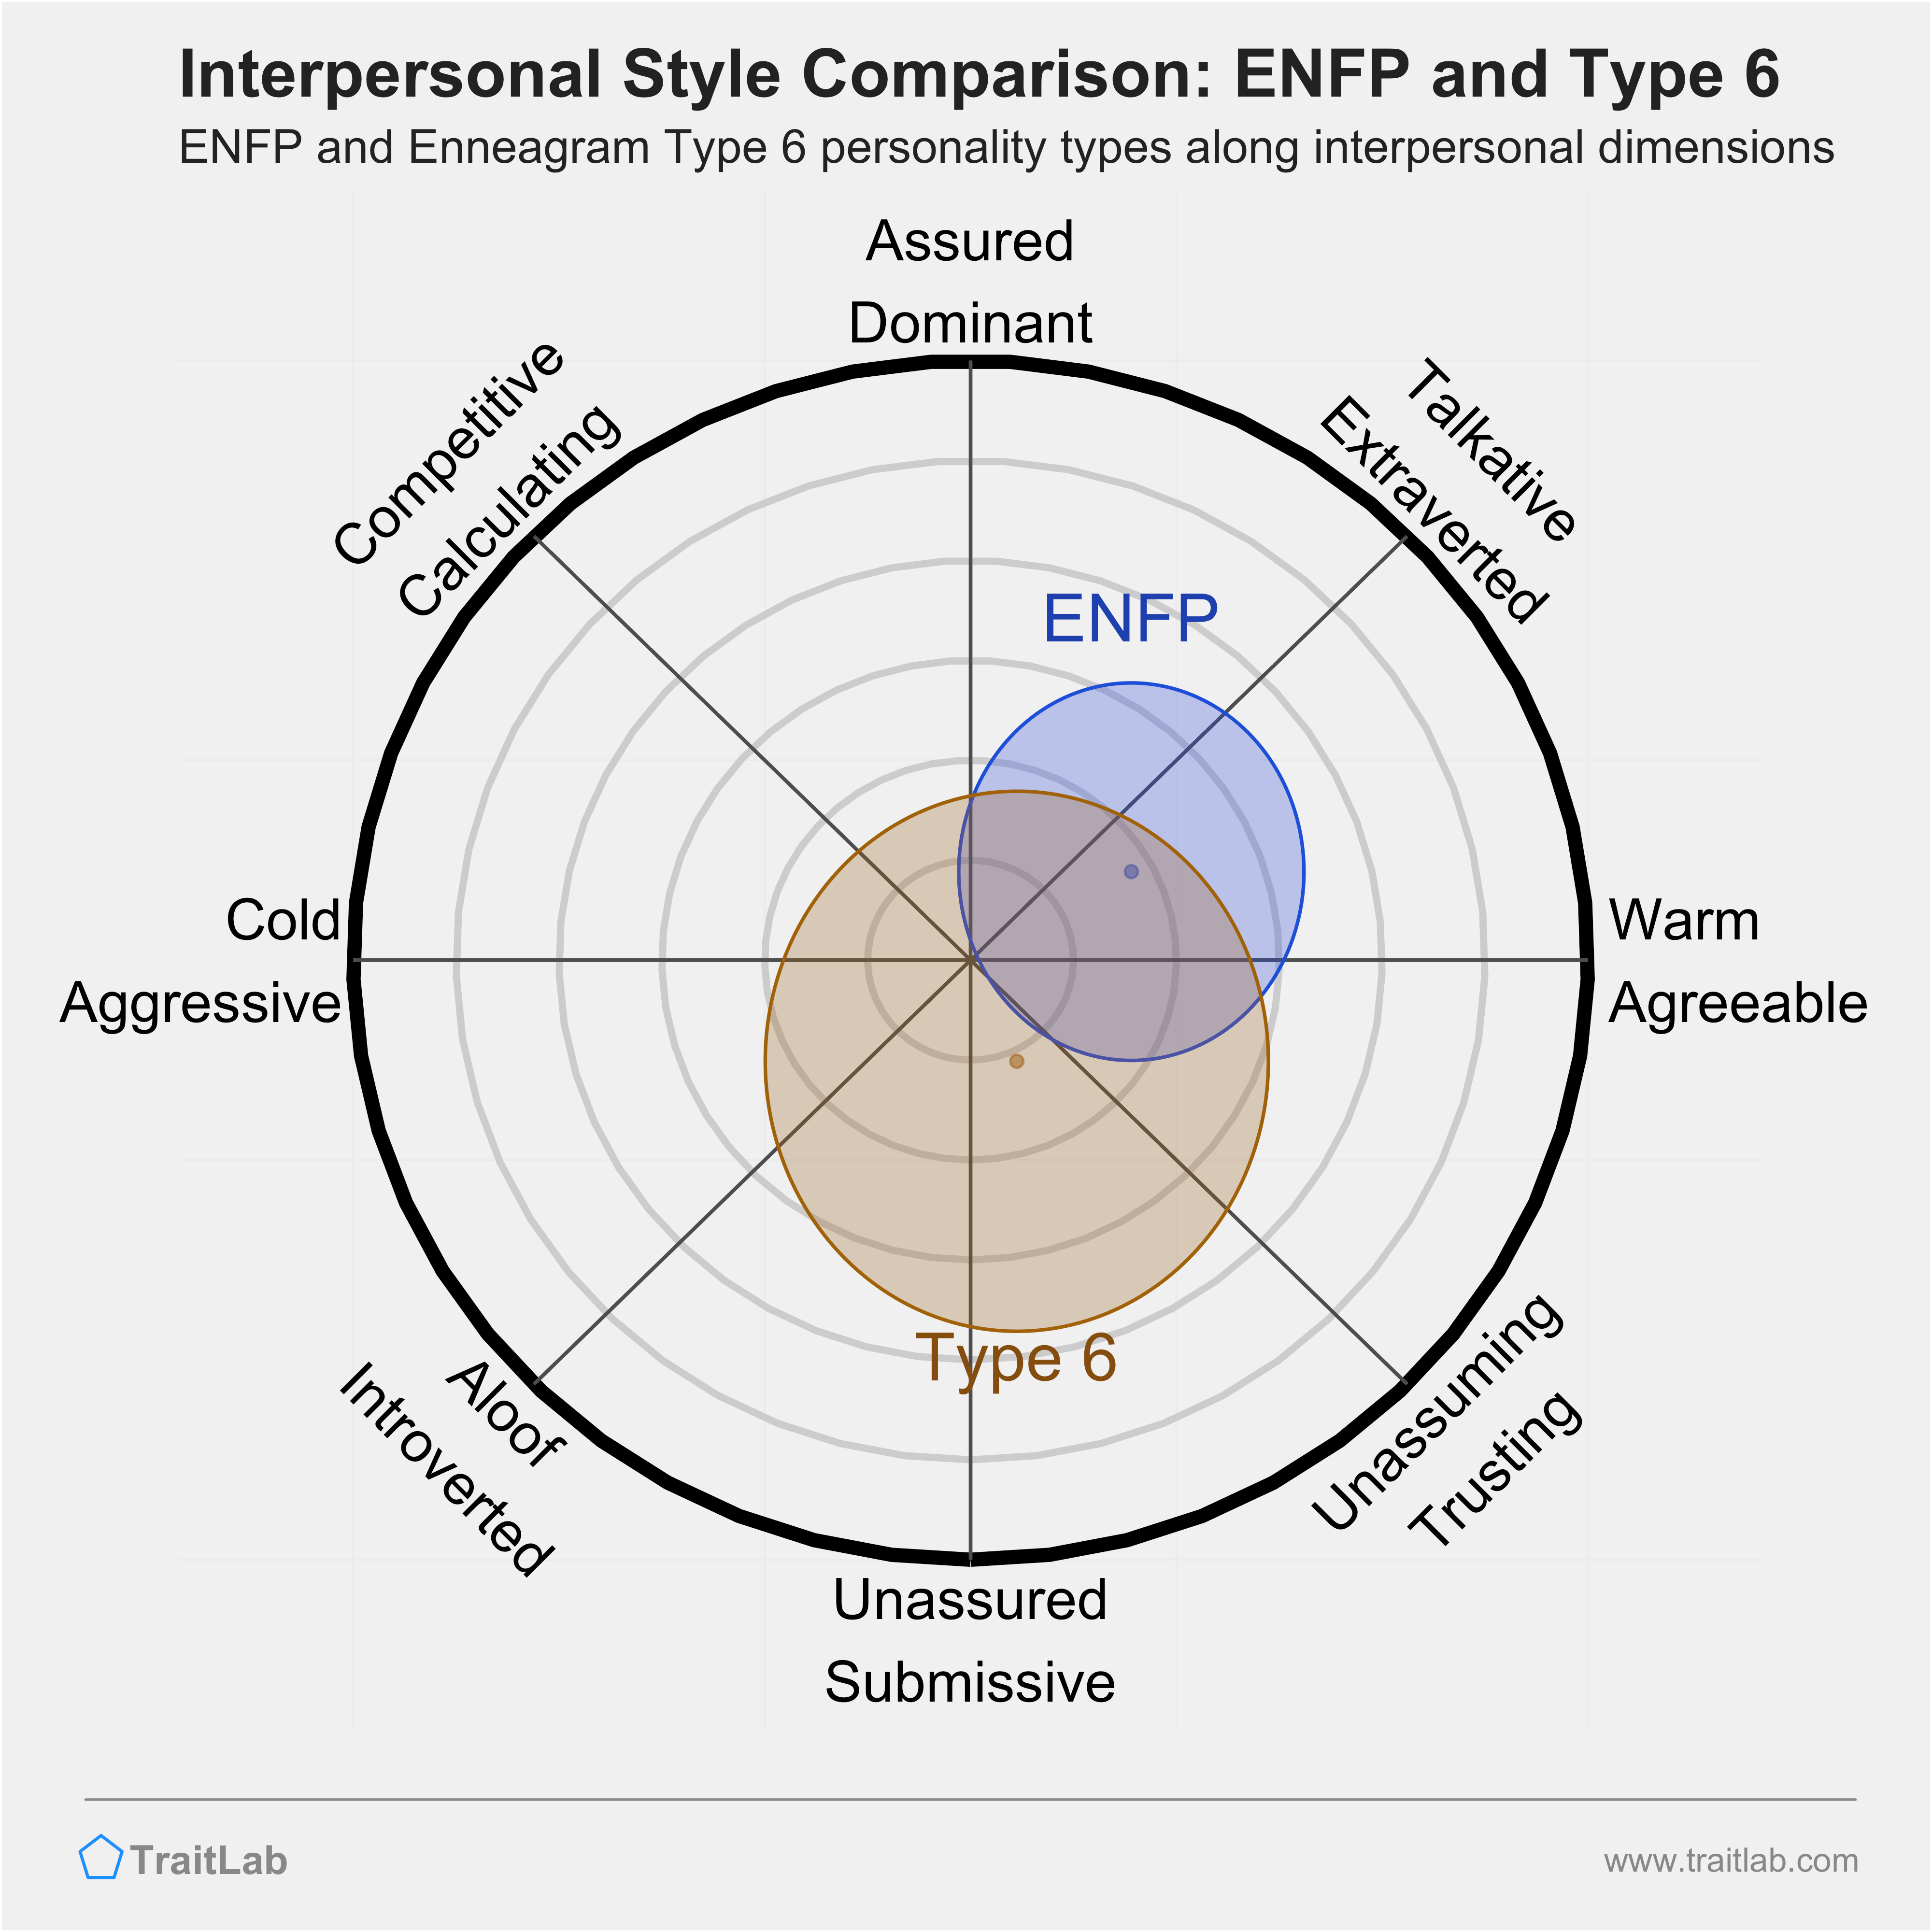 Enneagram ENFP and Type 6 comparison across interpersonal dimensions